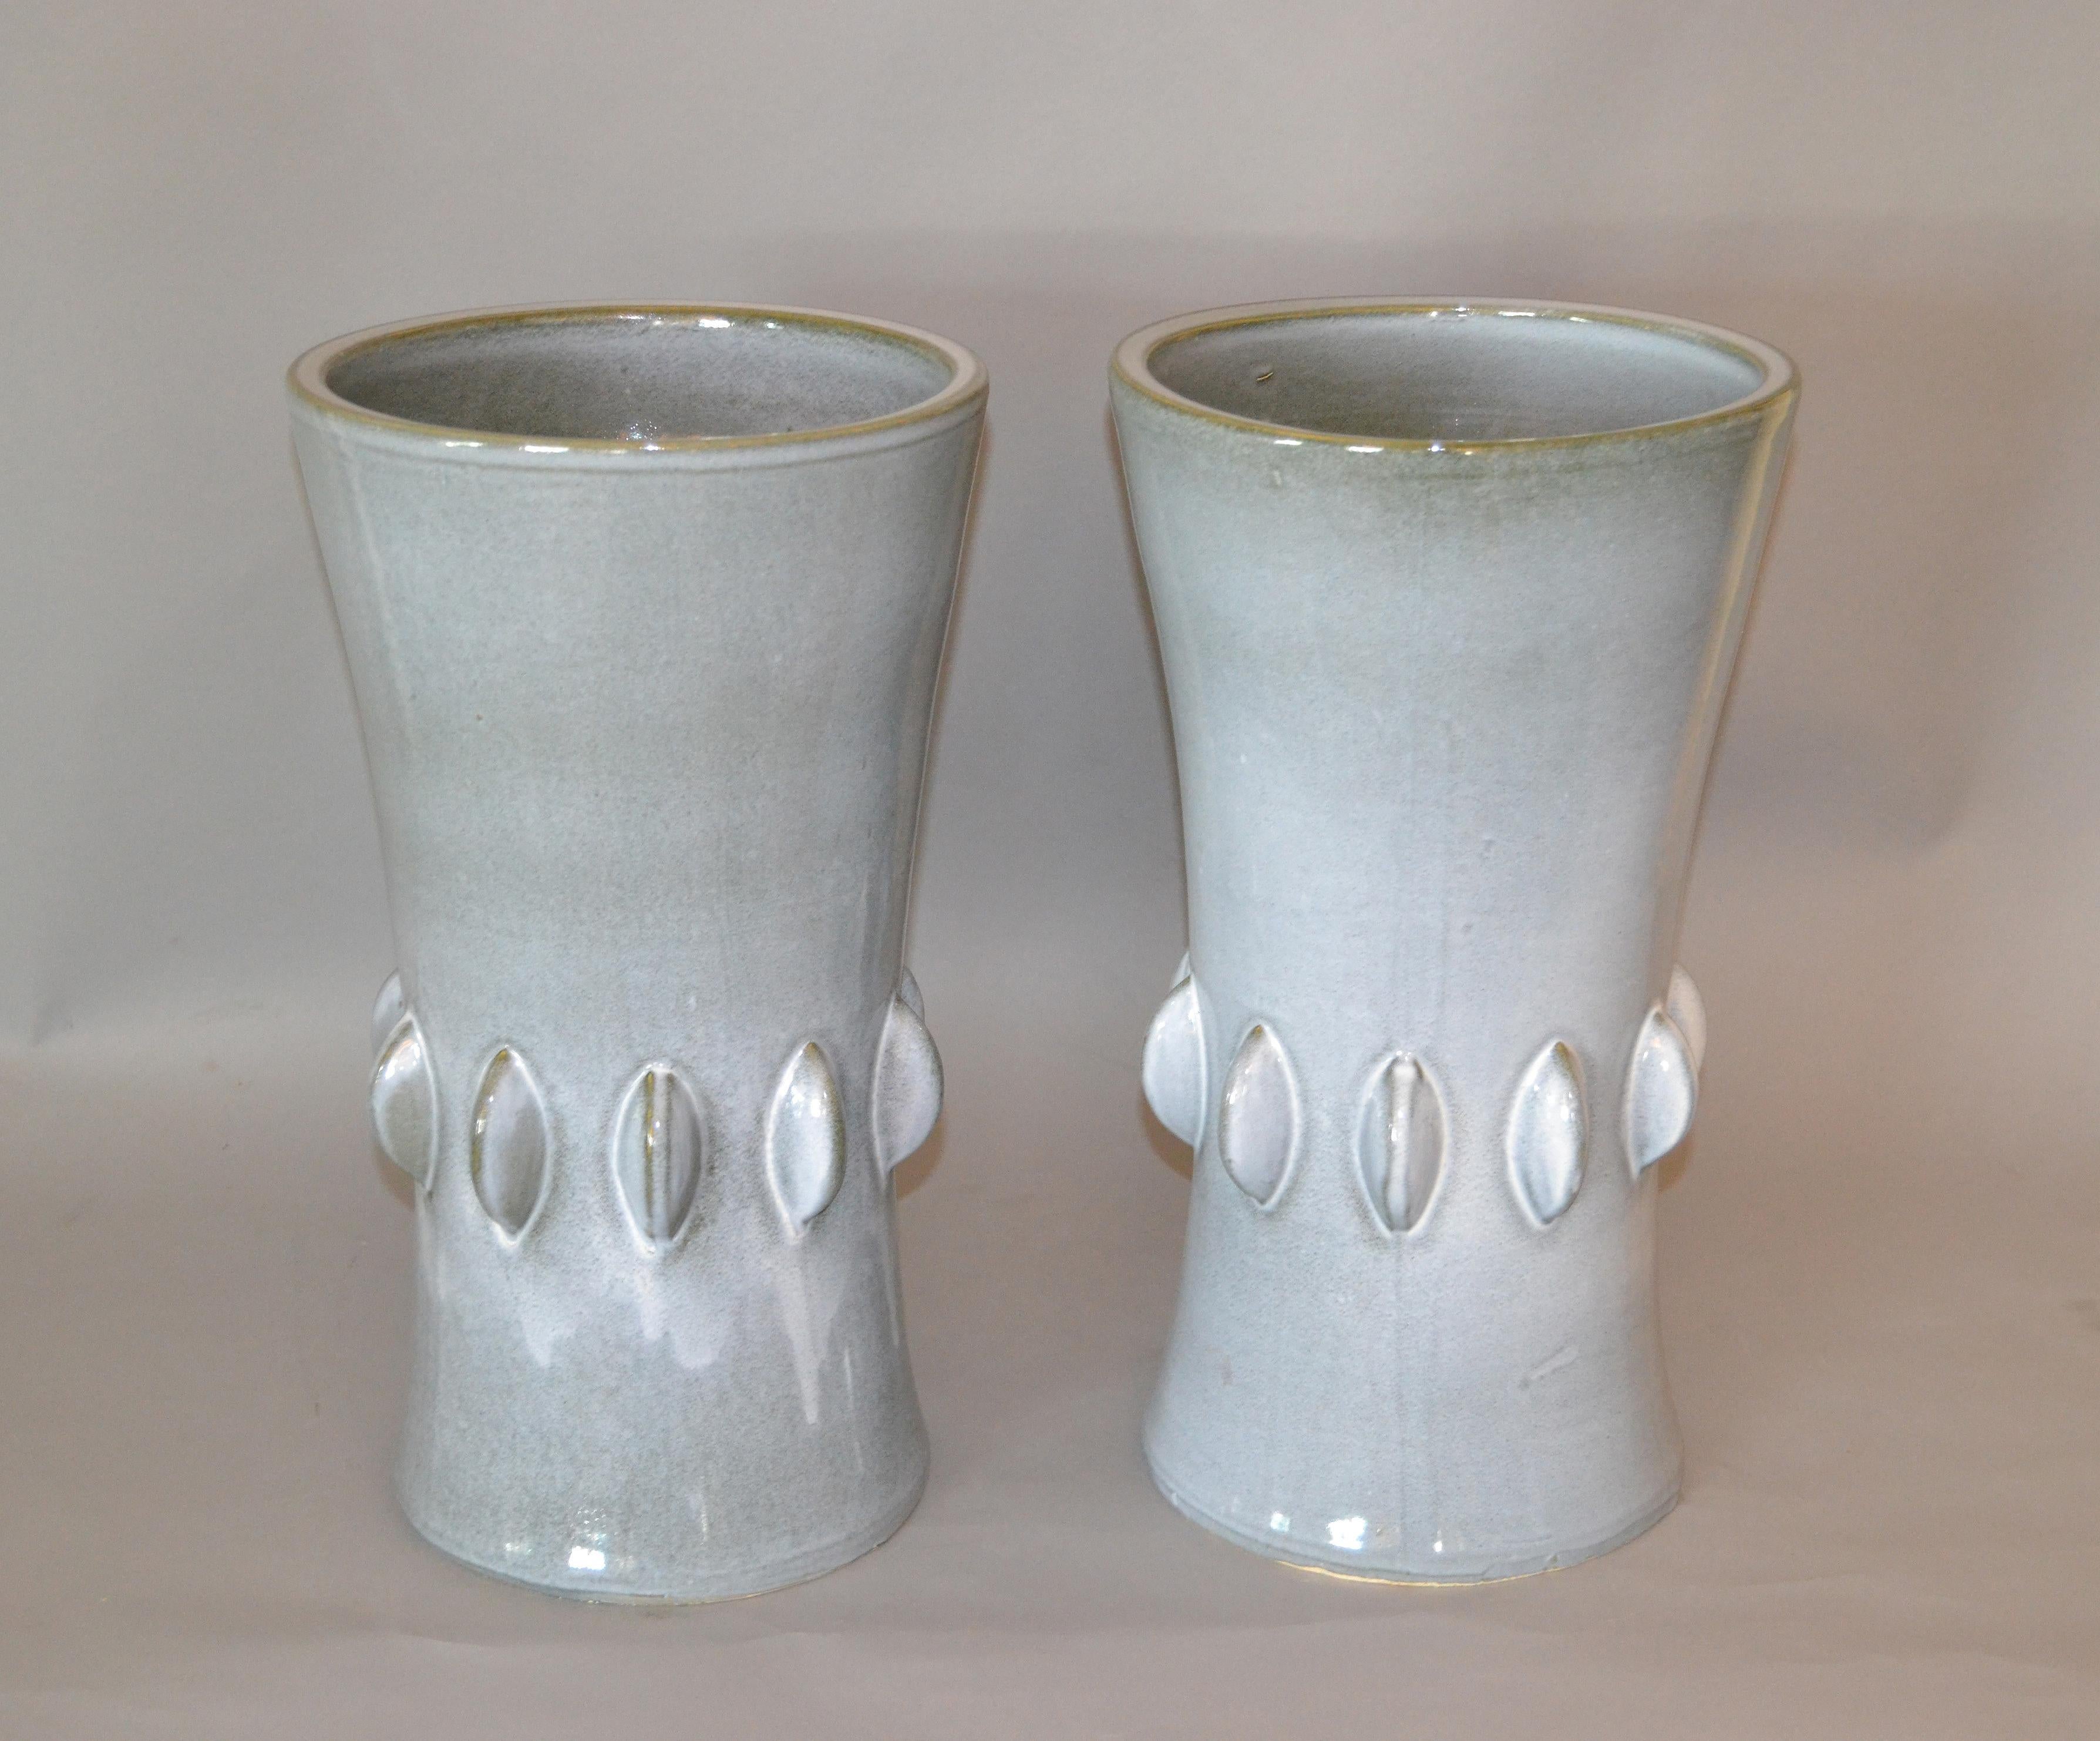 American Mid-Century Modern Gray Ceramic Vases with Dripping Glaze, Pair